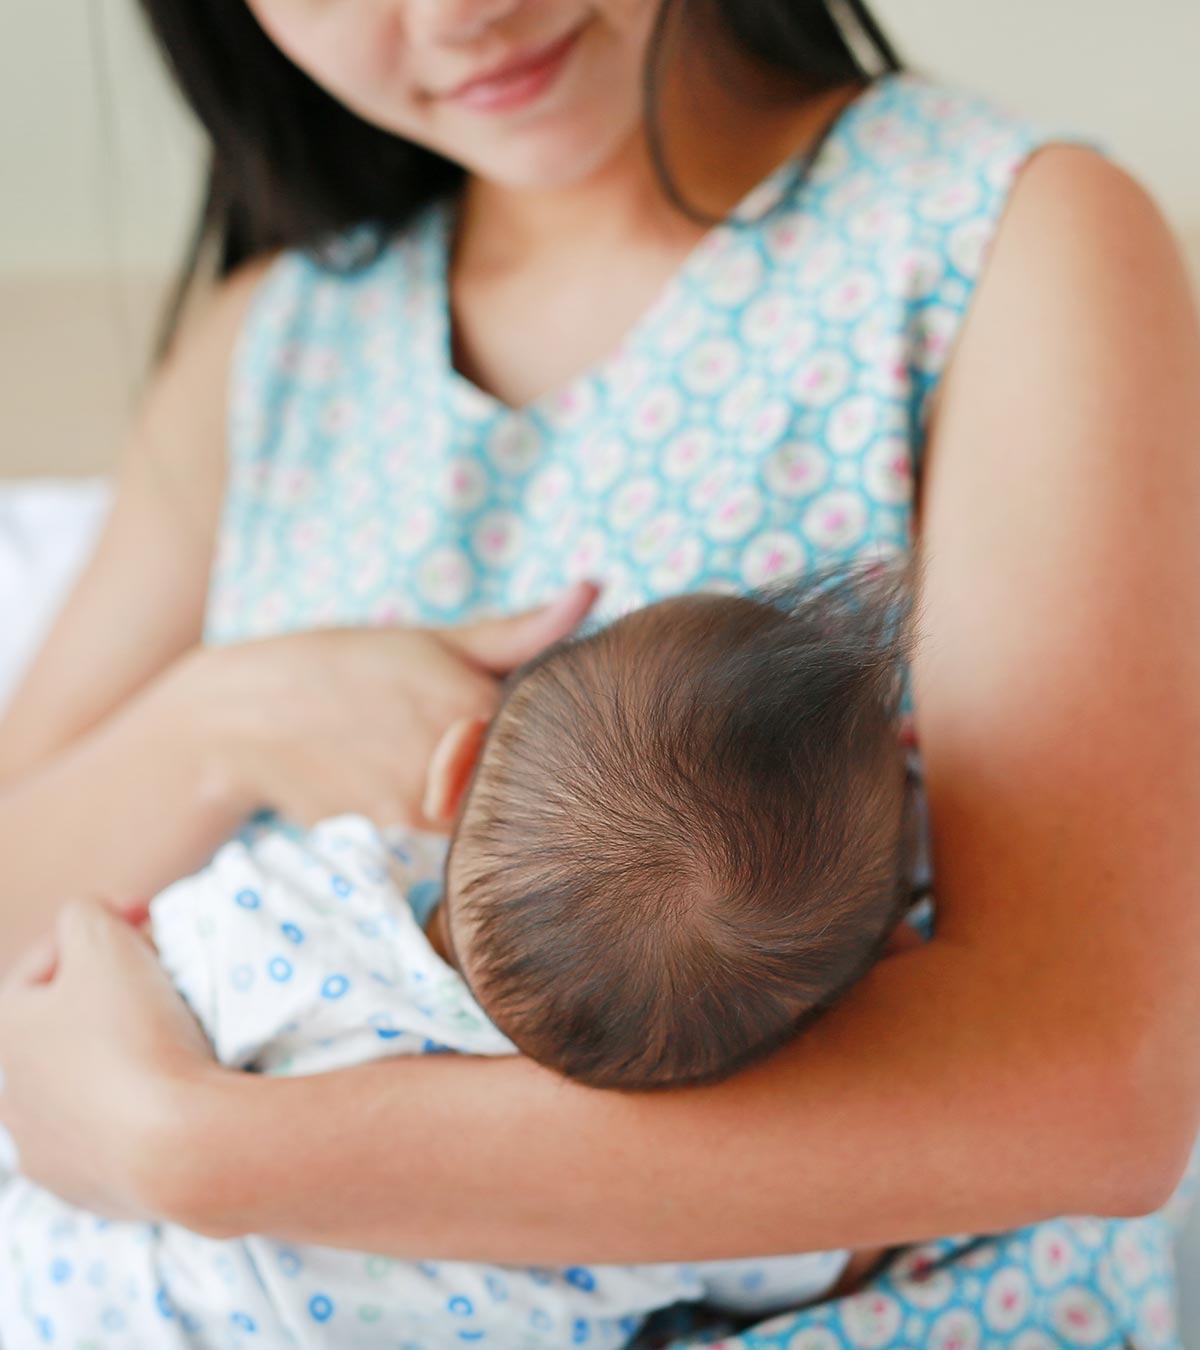 Baby Choking On Breastmilk: Why Does It Happen And What To Do